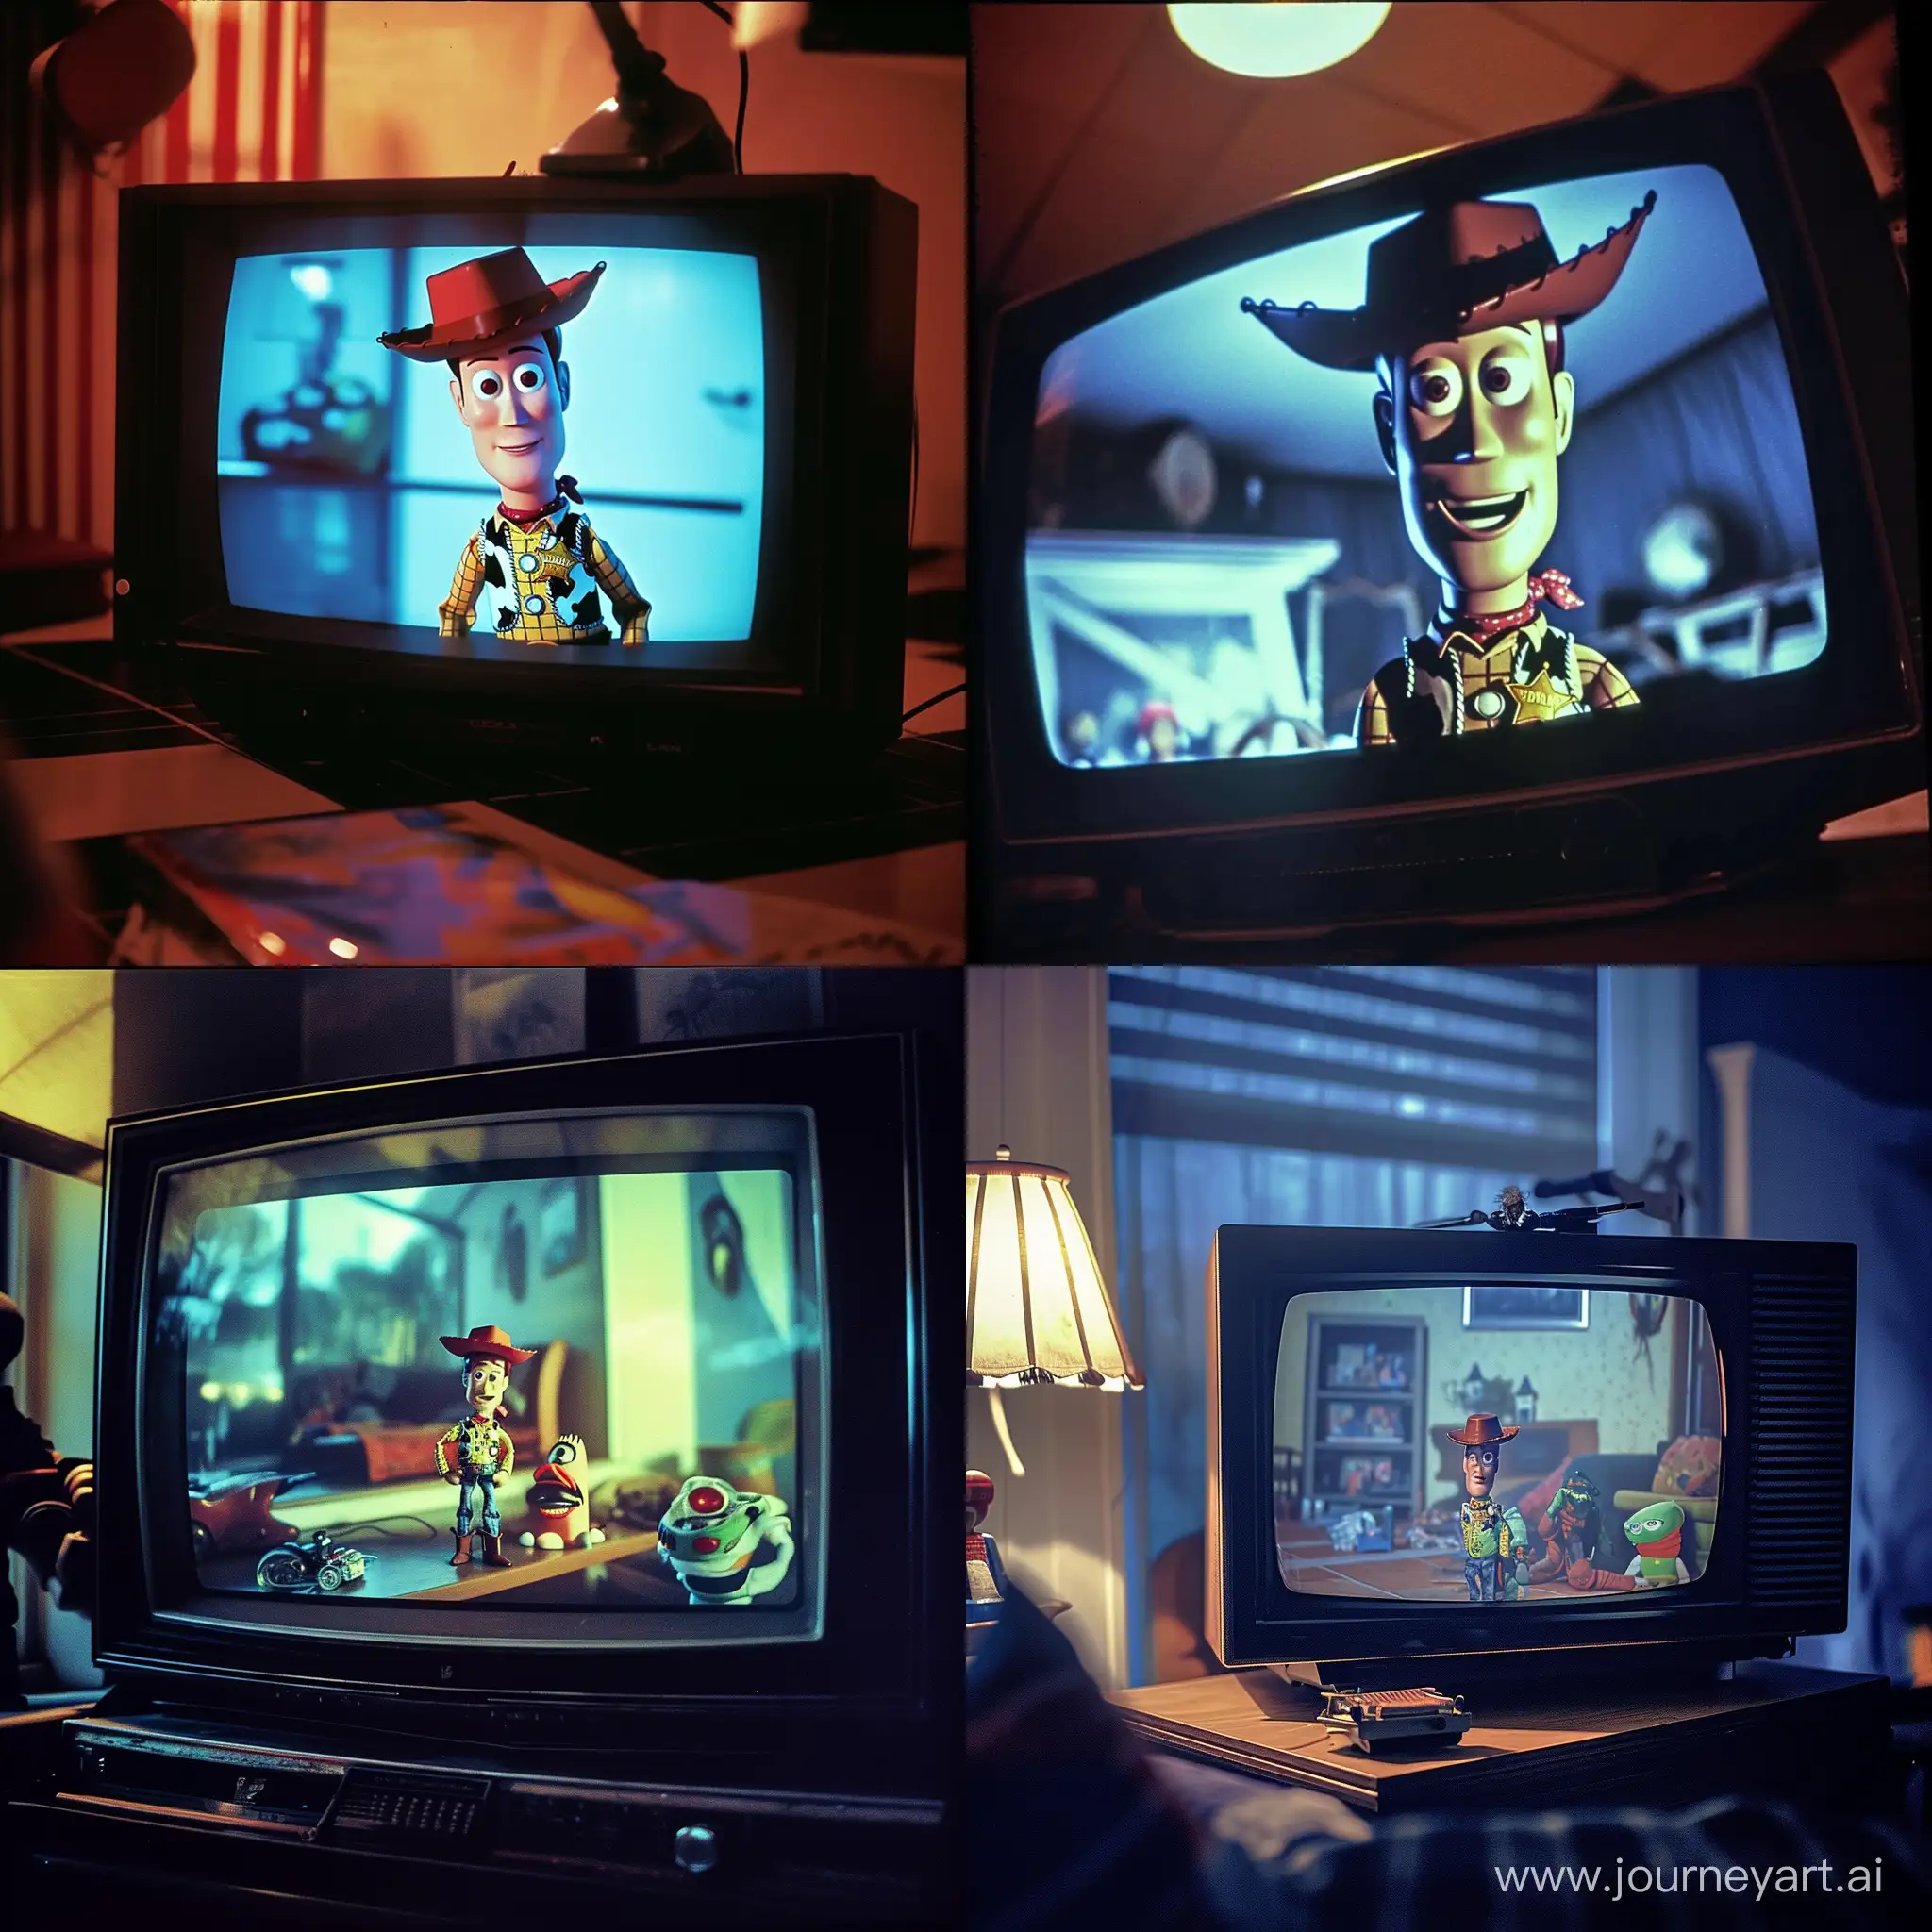  A photo taken of a tv screen playing a creepypasta version of Toy Story on VHS, 1997 --v 6